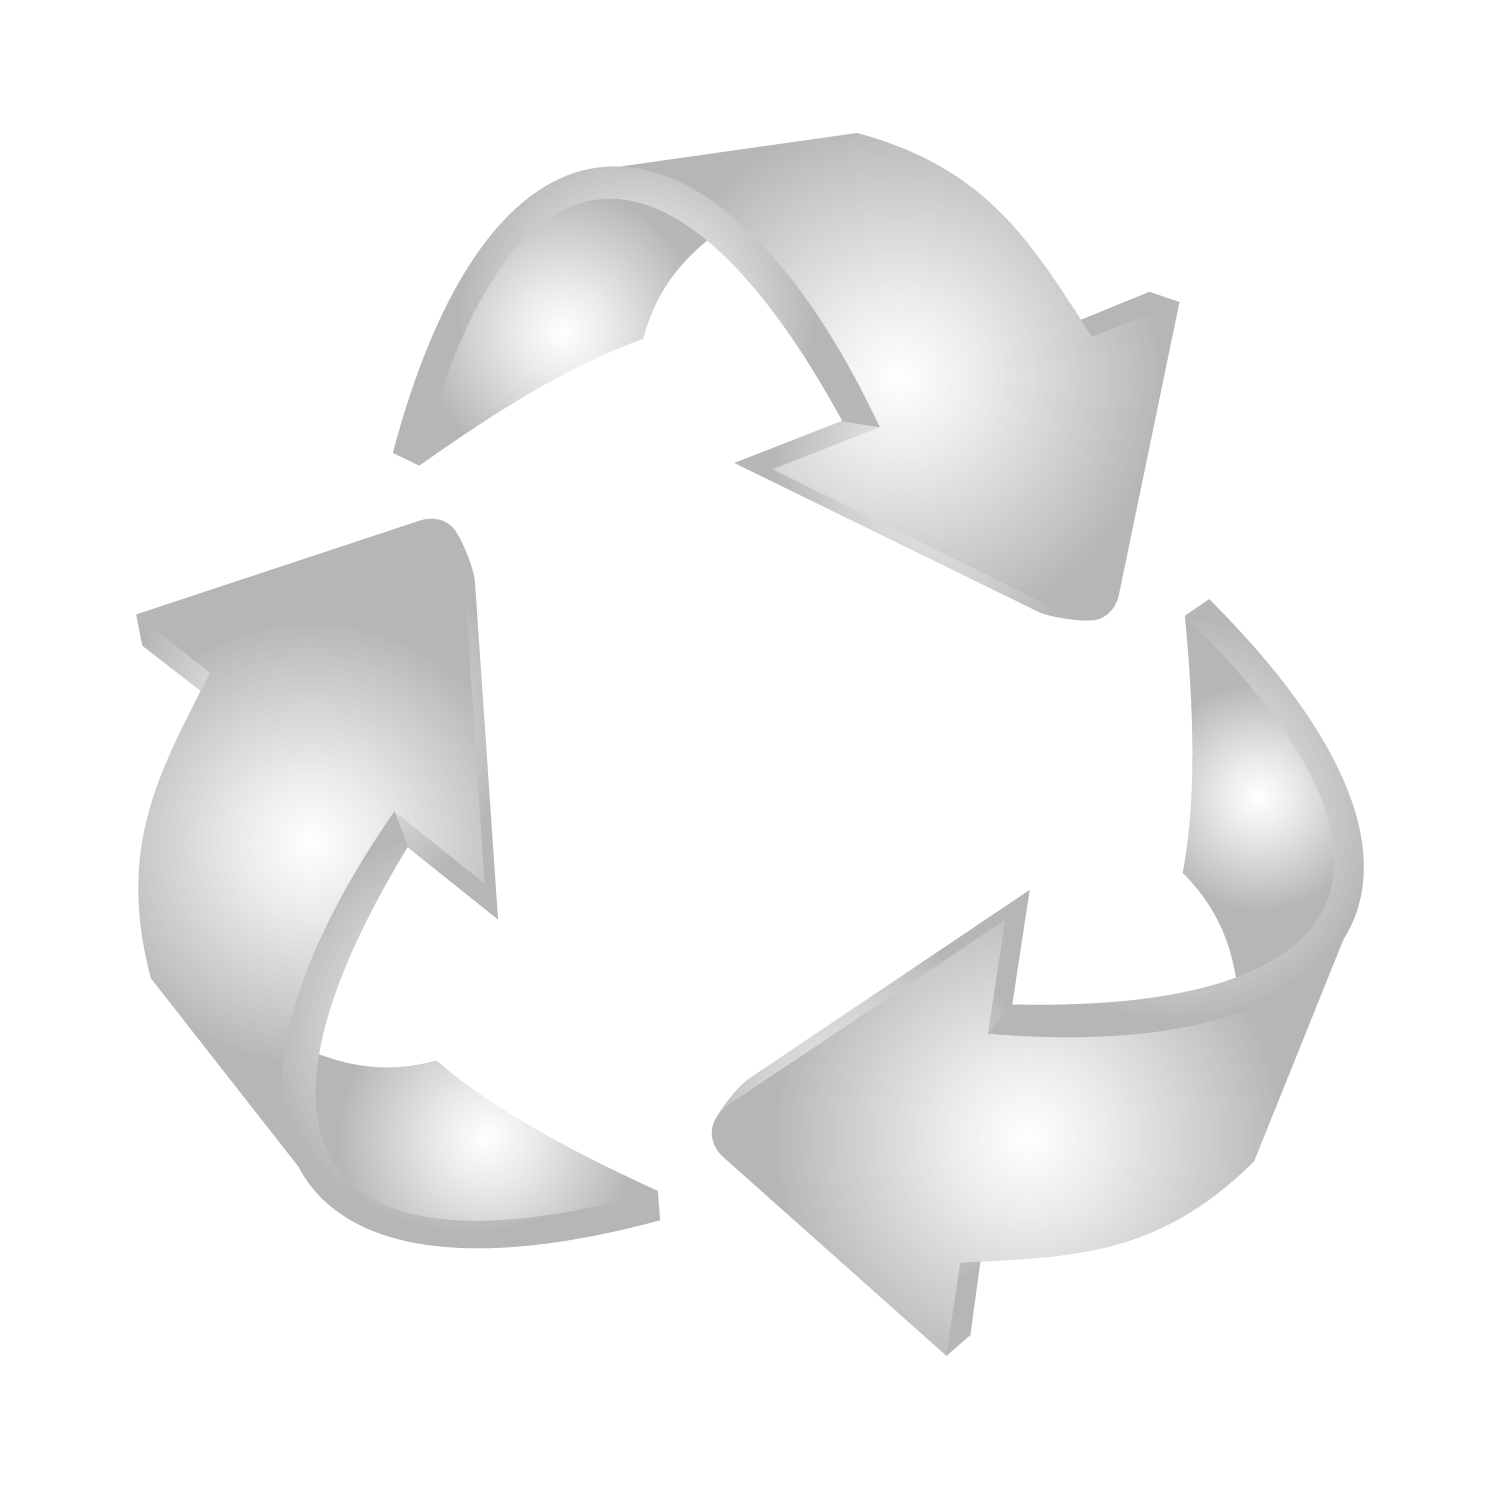 Vector Recycle Symbol Recycling Arrow Free Download Image PNG Image